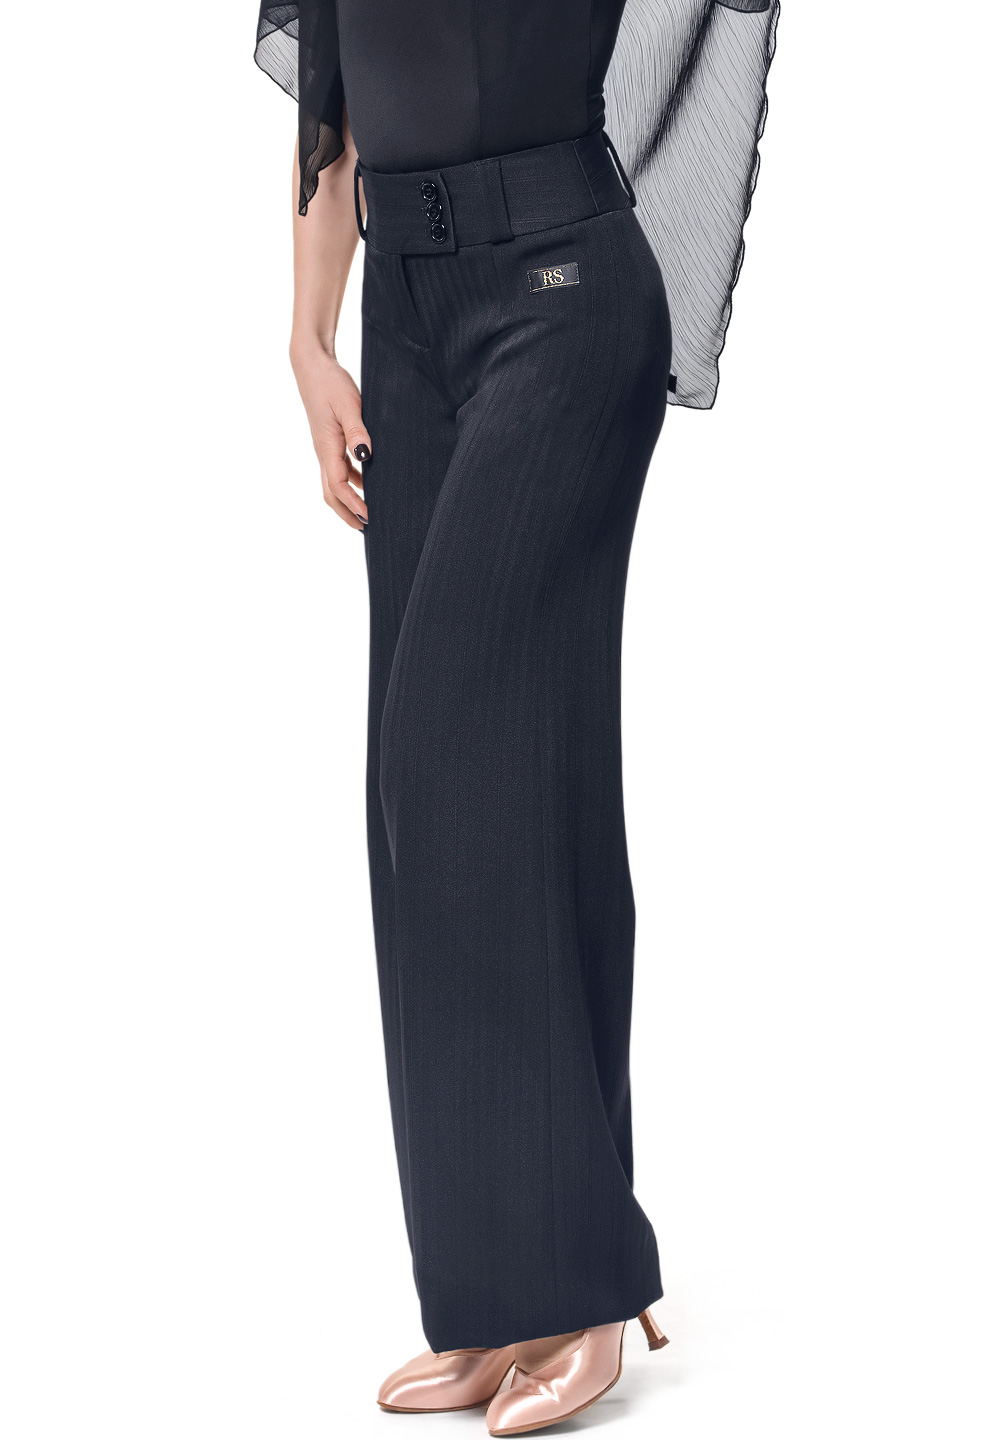 Fashion Ladies Rugged Jeans Trousers-casual Wear @ Best Price Online |  Jumia Kenya